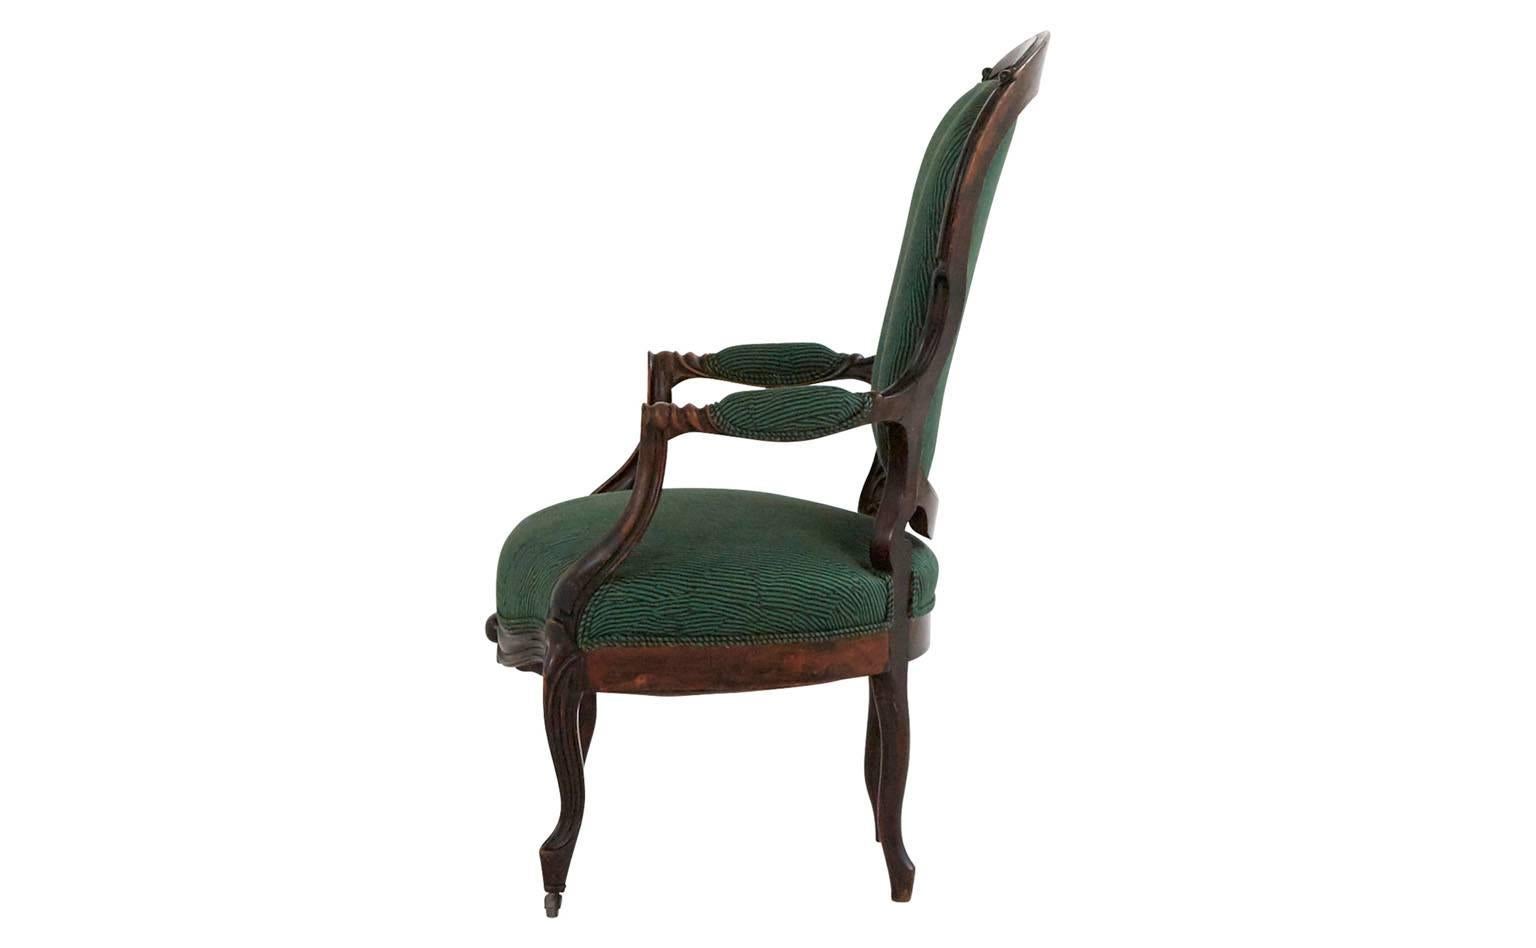 Reupholstered in Kelly Wearstler avant green linen
Hand-painted ebony wood
20th century
France

Dimensions:
Overall: 23'D x 24'W x 42'H 
Seat height: 16.5'H
Arm height: 25'H